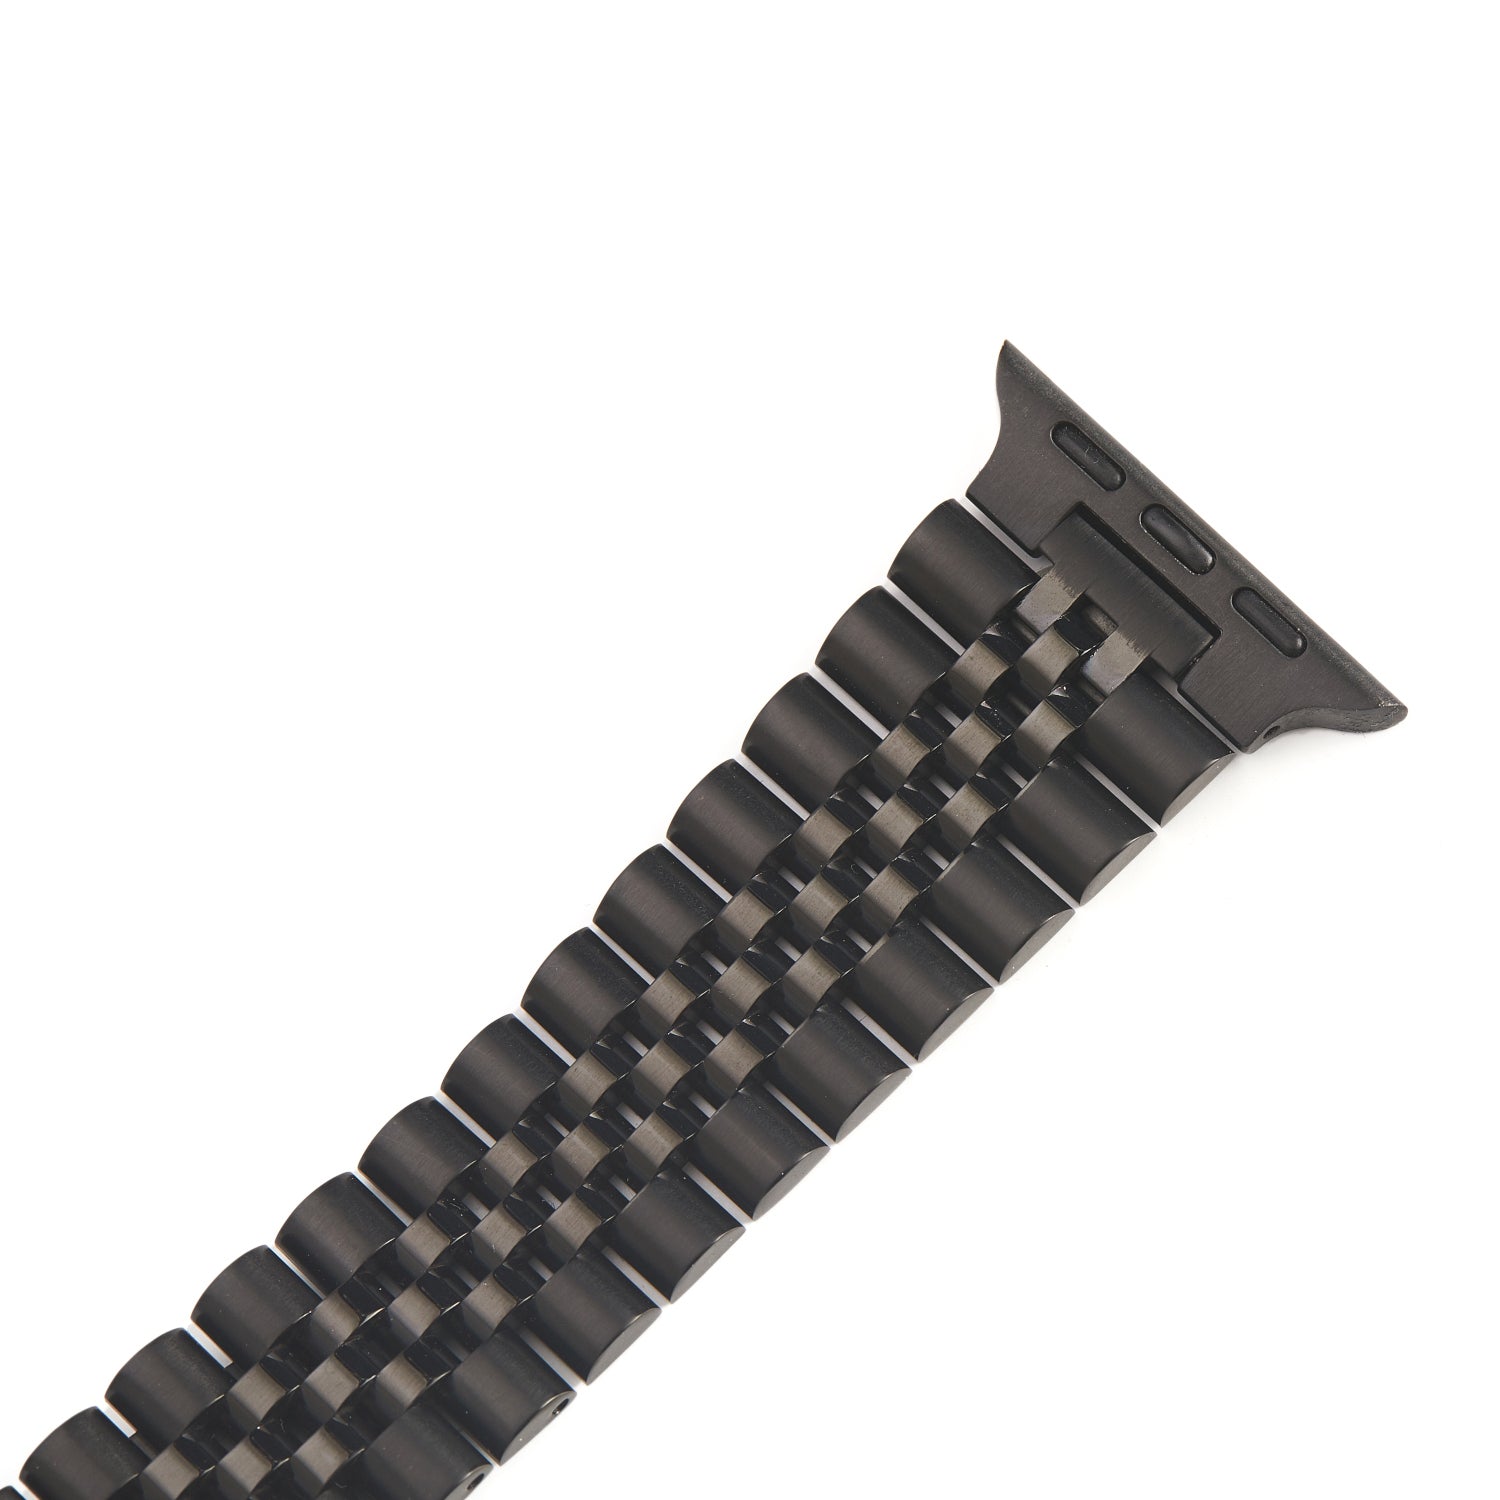 Stainless Steel Link Bracelet Band - The Perth in Black - Compatible with Apple Watch Size 38mm to 41mm - Friendie Pty Ltd